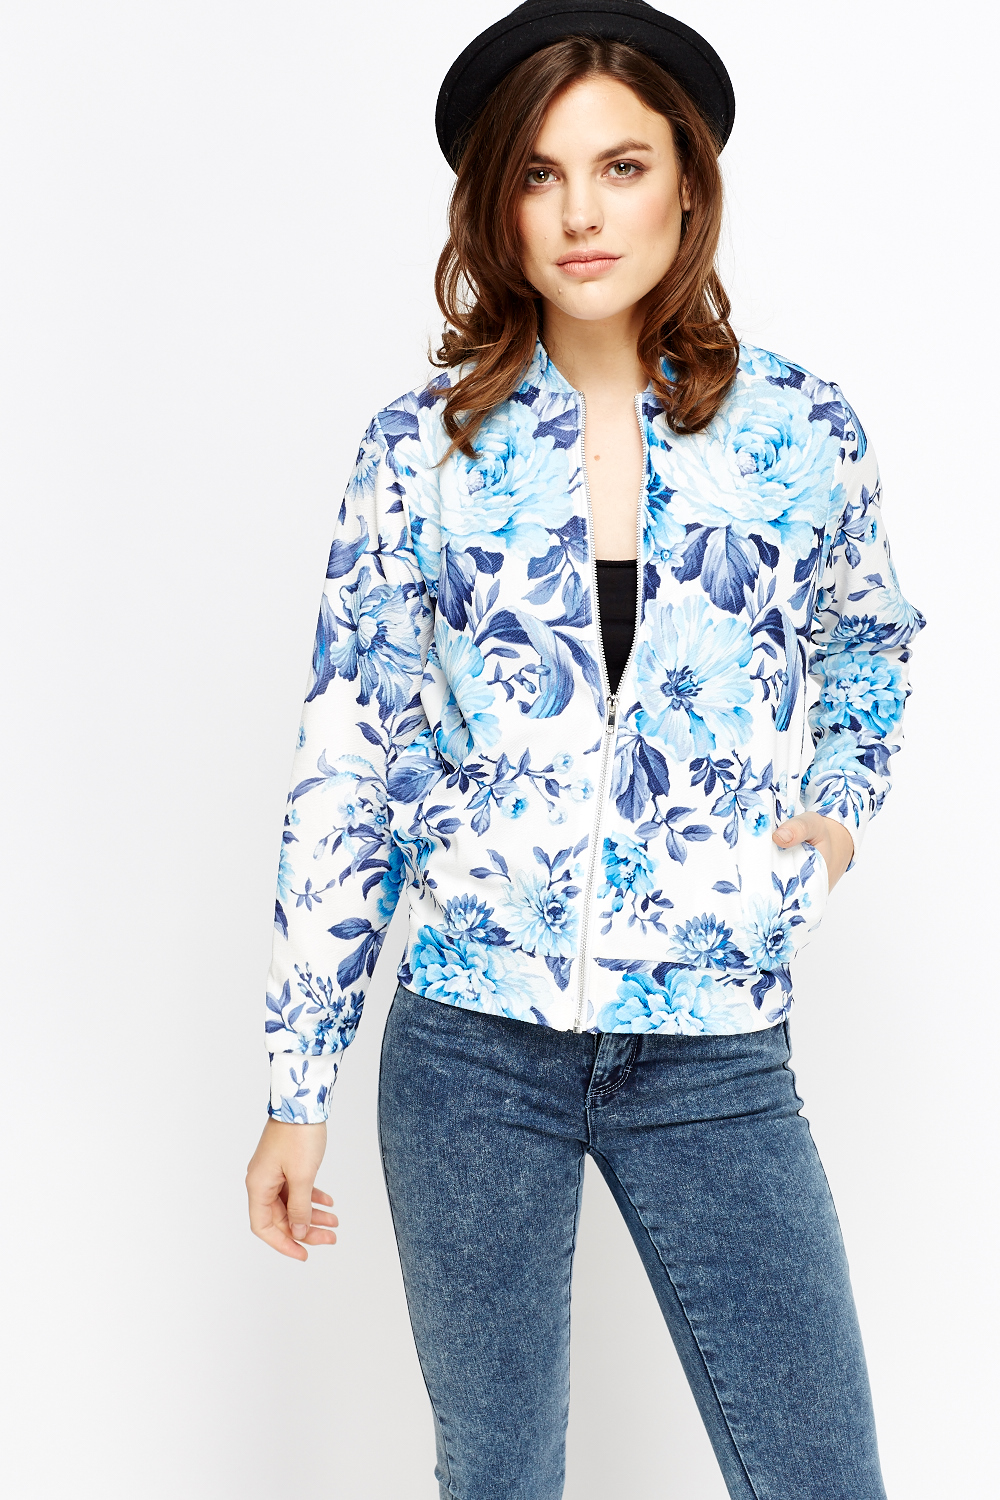 Blue Floral Thin Bomber Jacket - Just $7